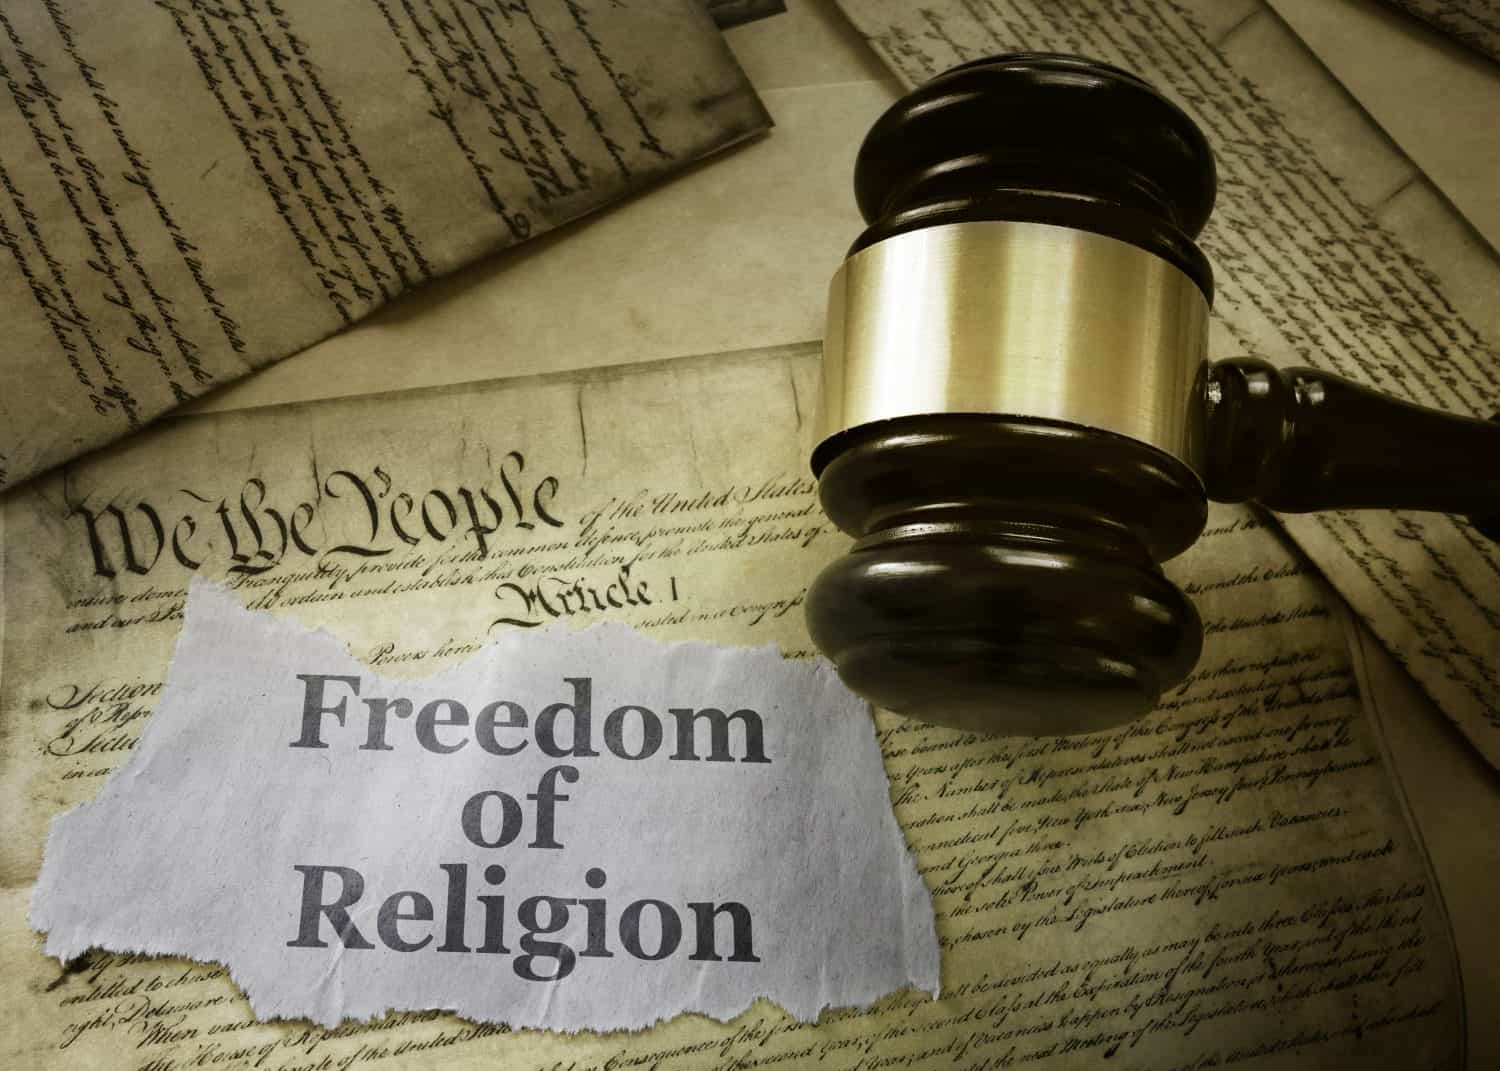 Freedom of Religion newspaper headline on a copy of the US Constitution with gavel